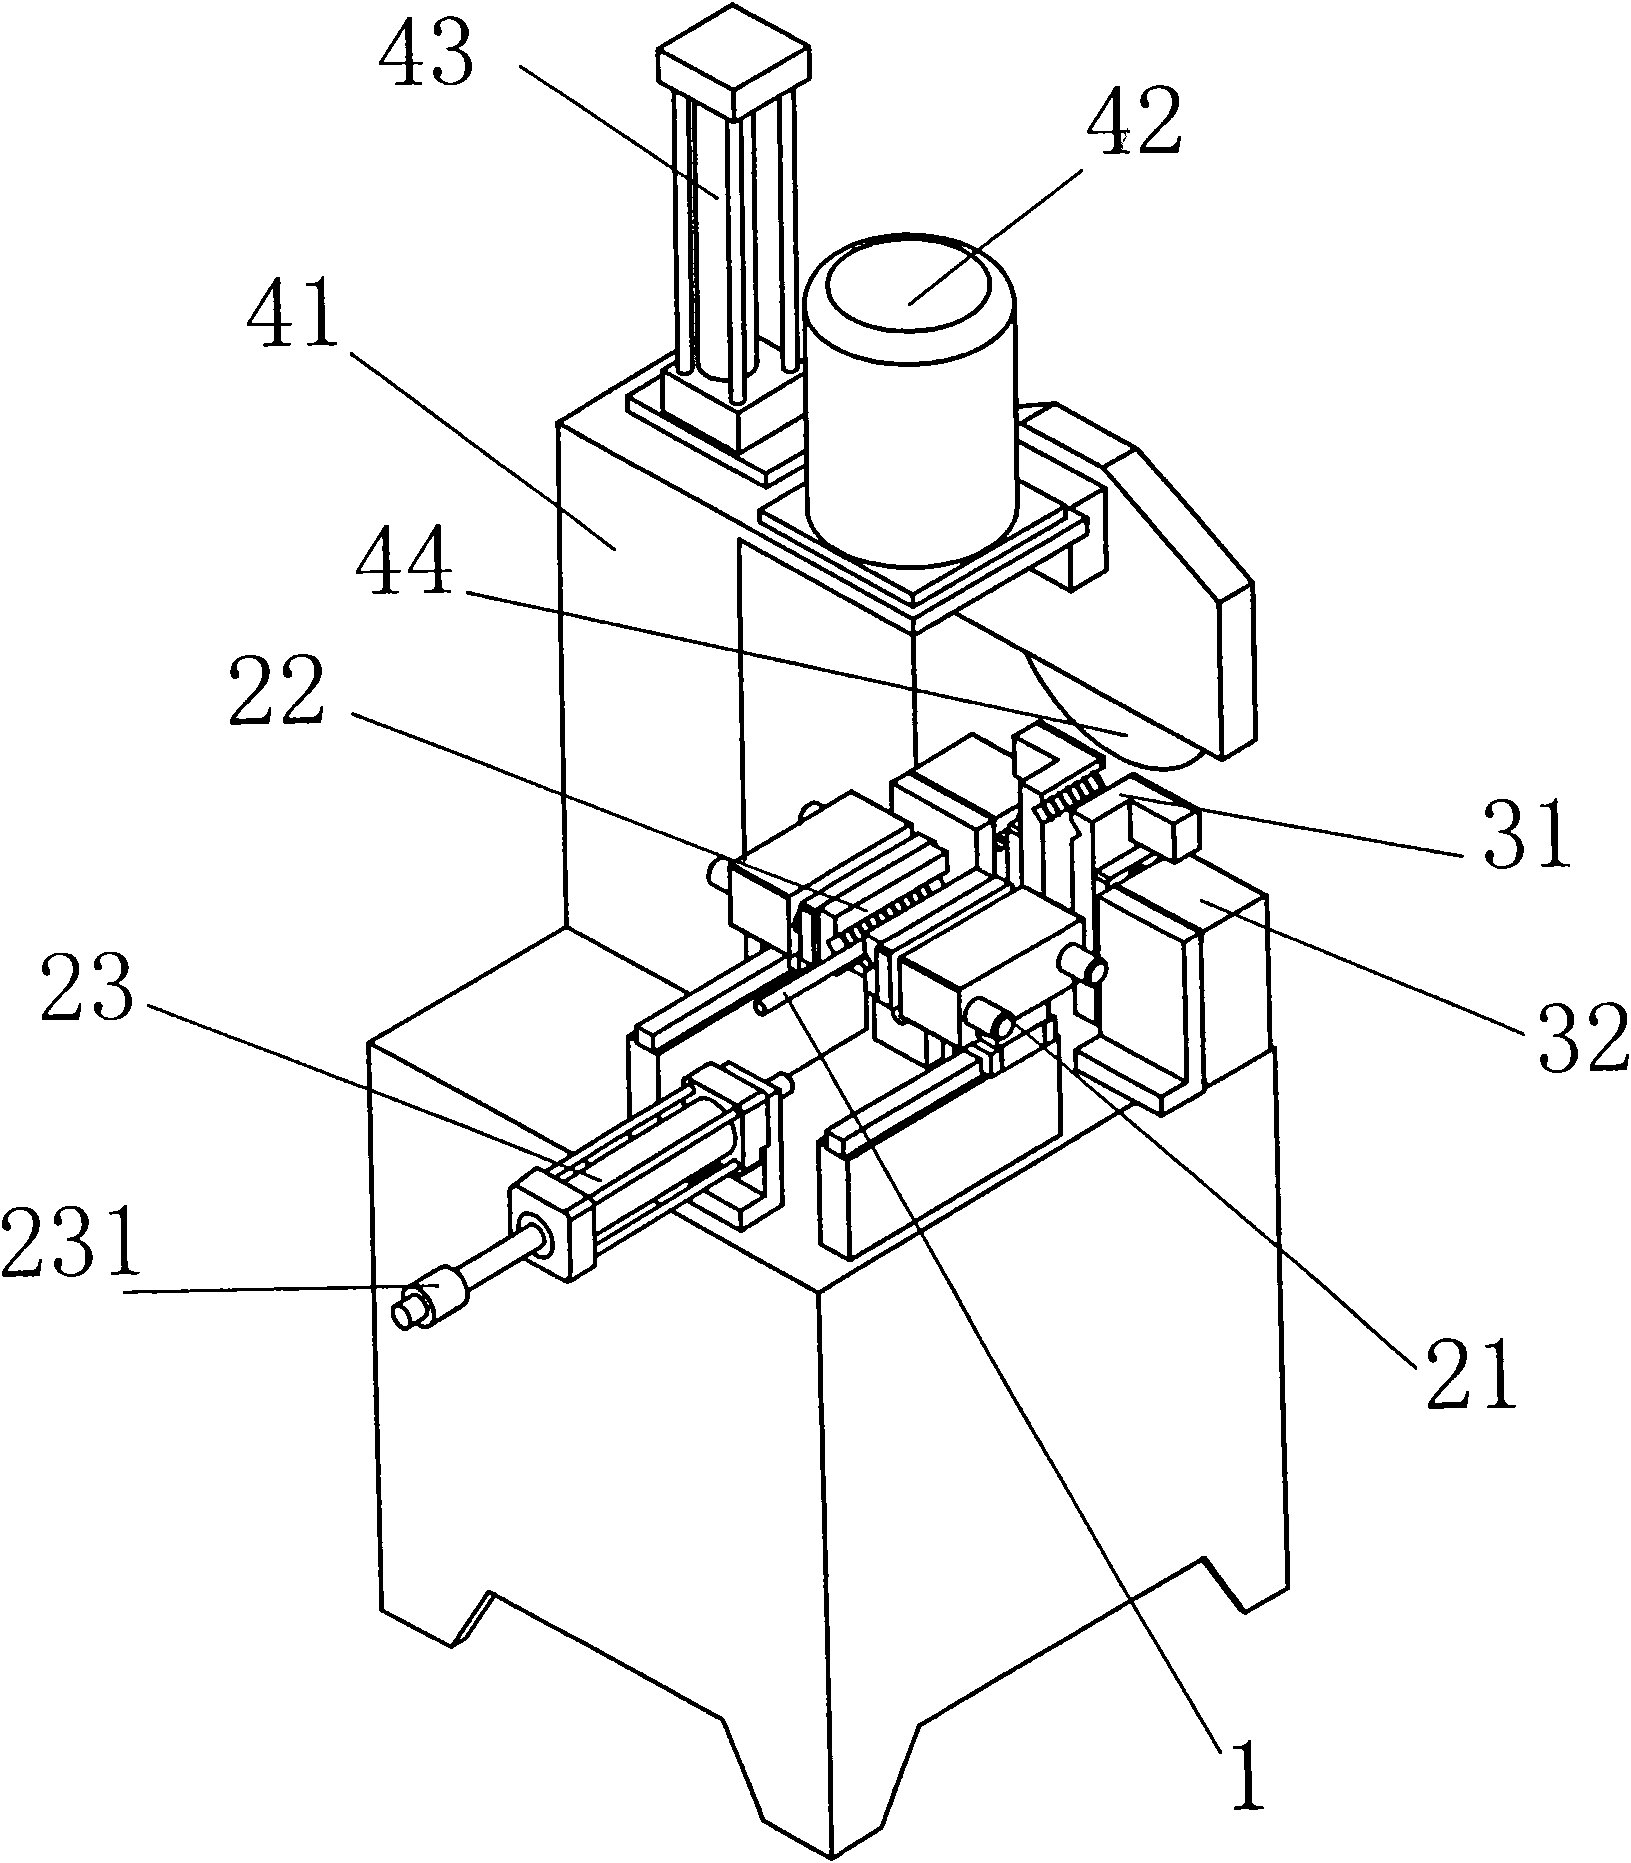 Device for automatically cutting pipe fitting